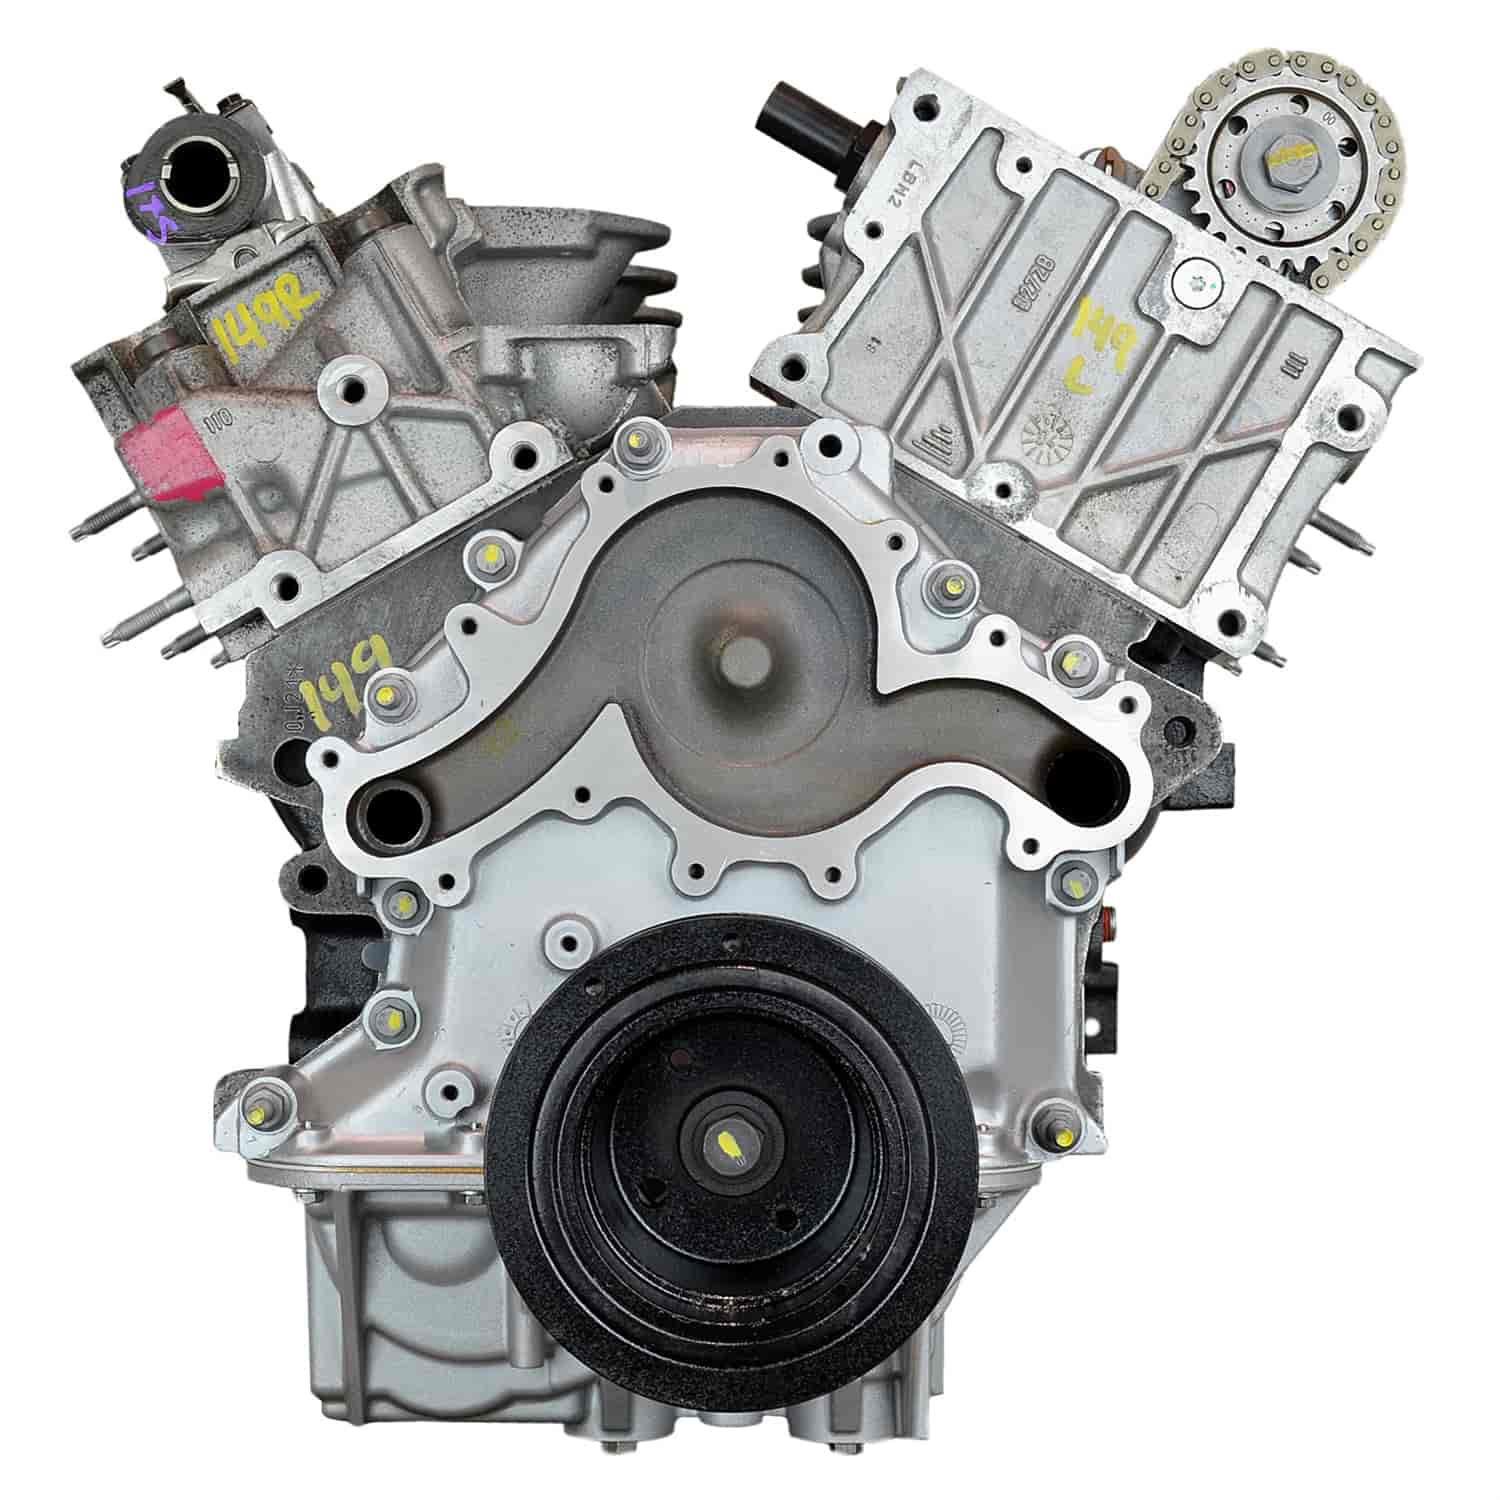 Remanufactured Crate Engine for 2001-2007 Ford Explorer & Mercury Mountaineer with 4.0L V6